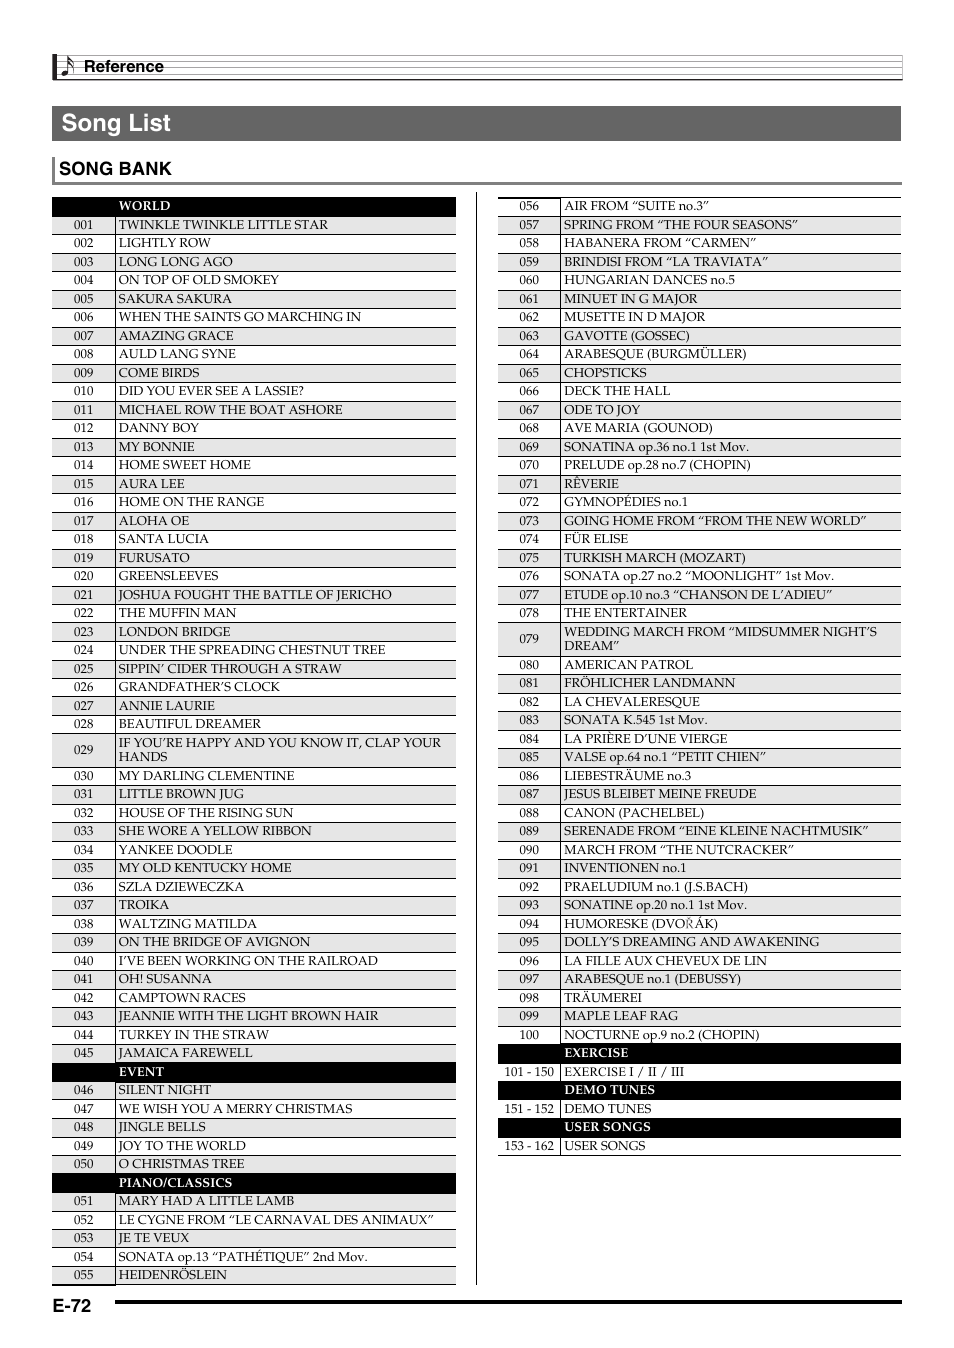 Song list, E-72, Song bank | Casio CDP-200R User Manual | Page 74 / 78 |  Original mode